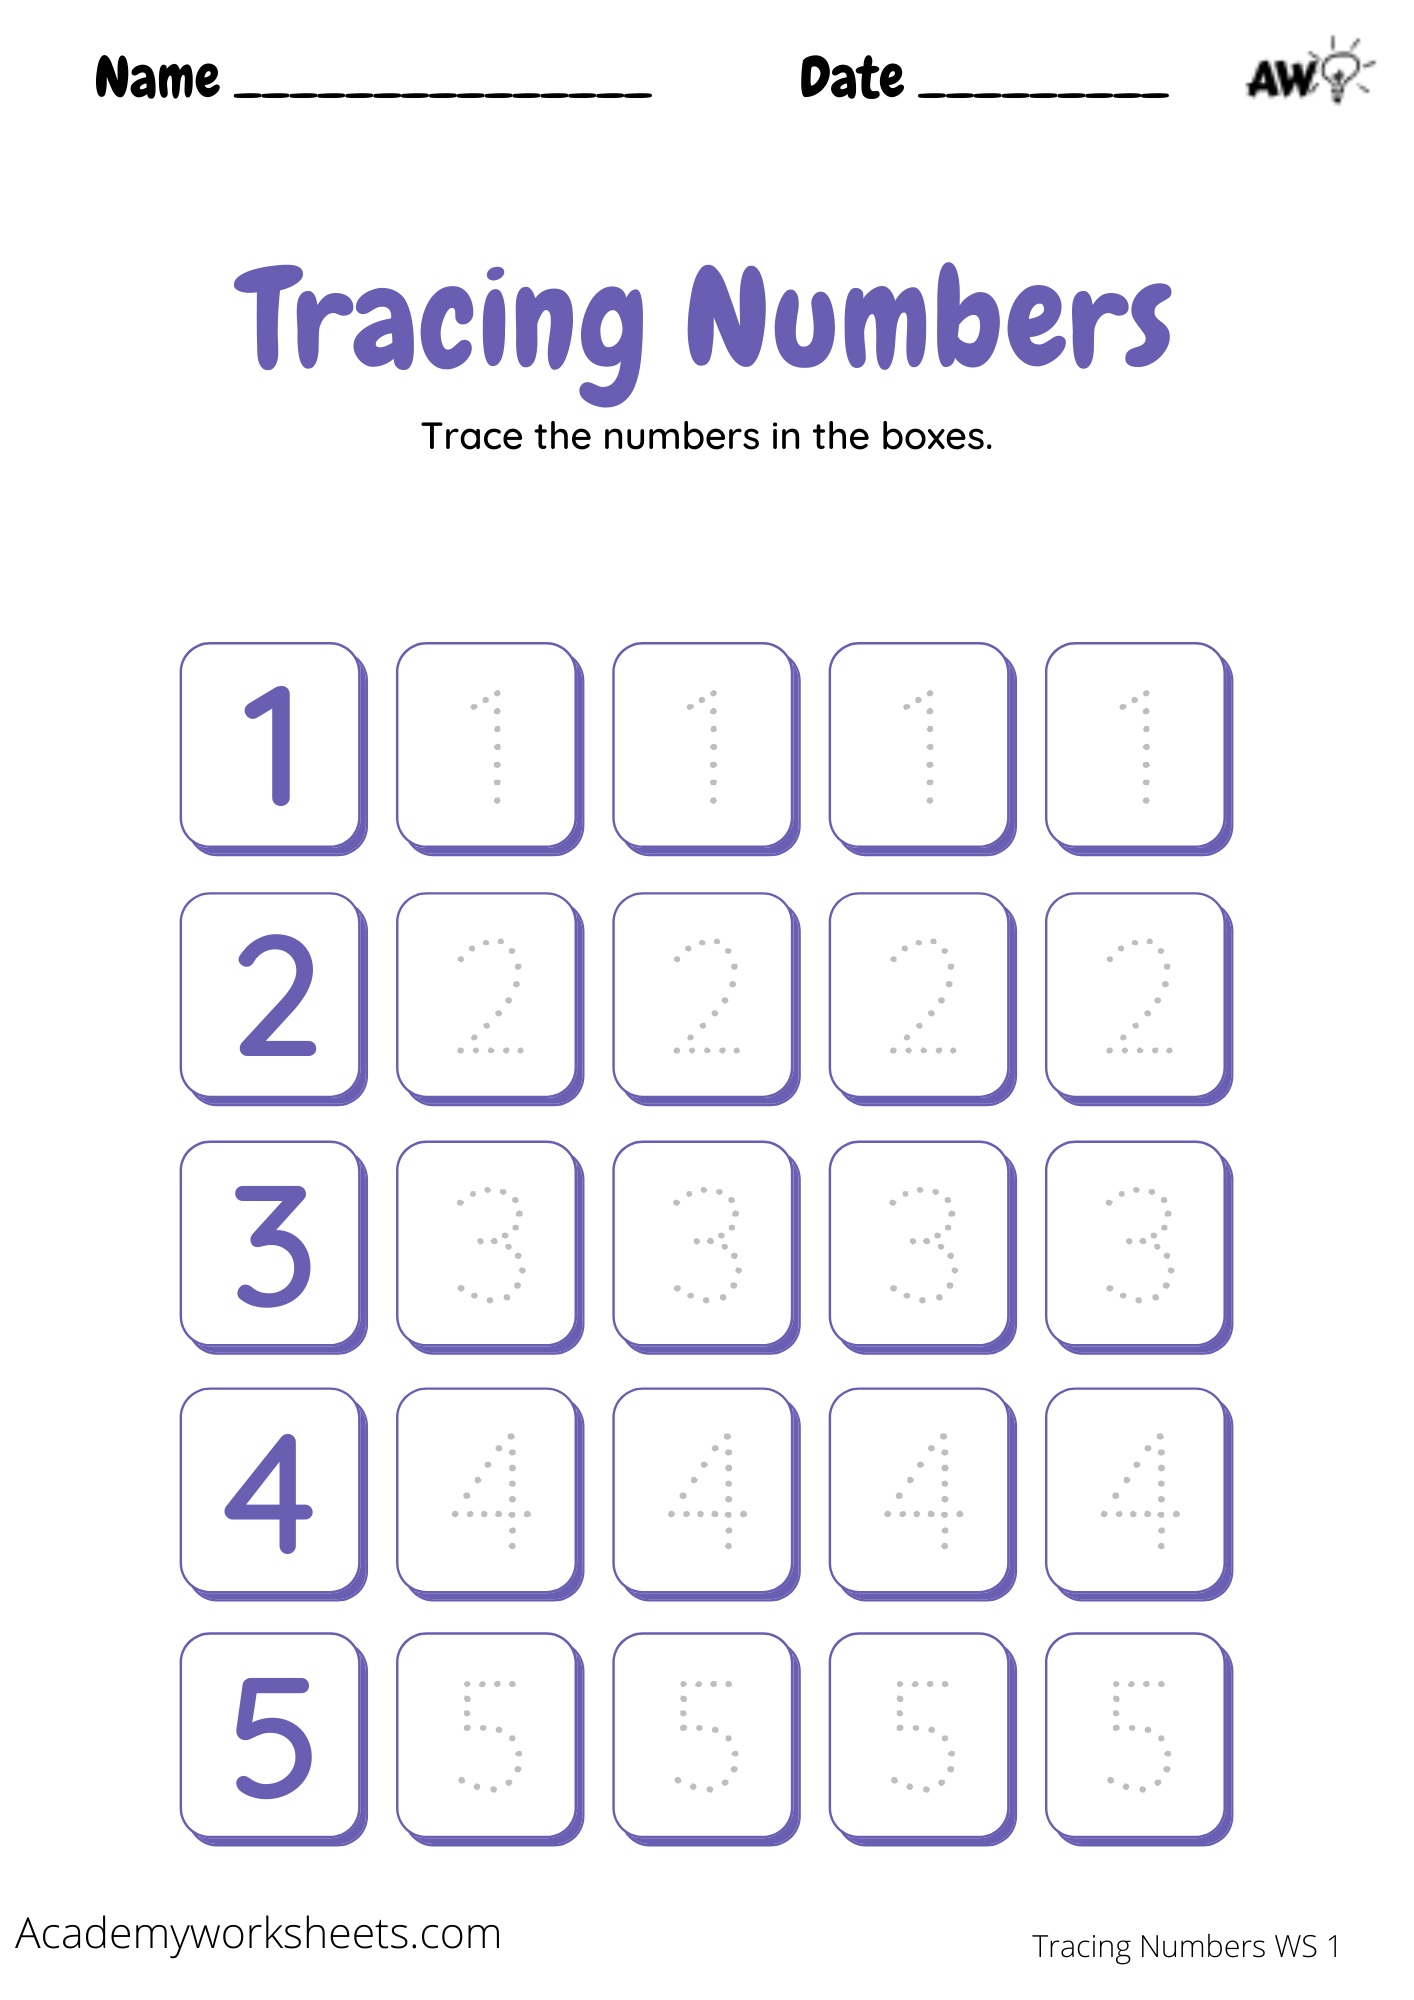 trace-the-numbers-1-to-5-numbers-worksheet-for-kids-jumpstart-number-1-5-tracing-worksheets